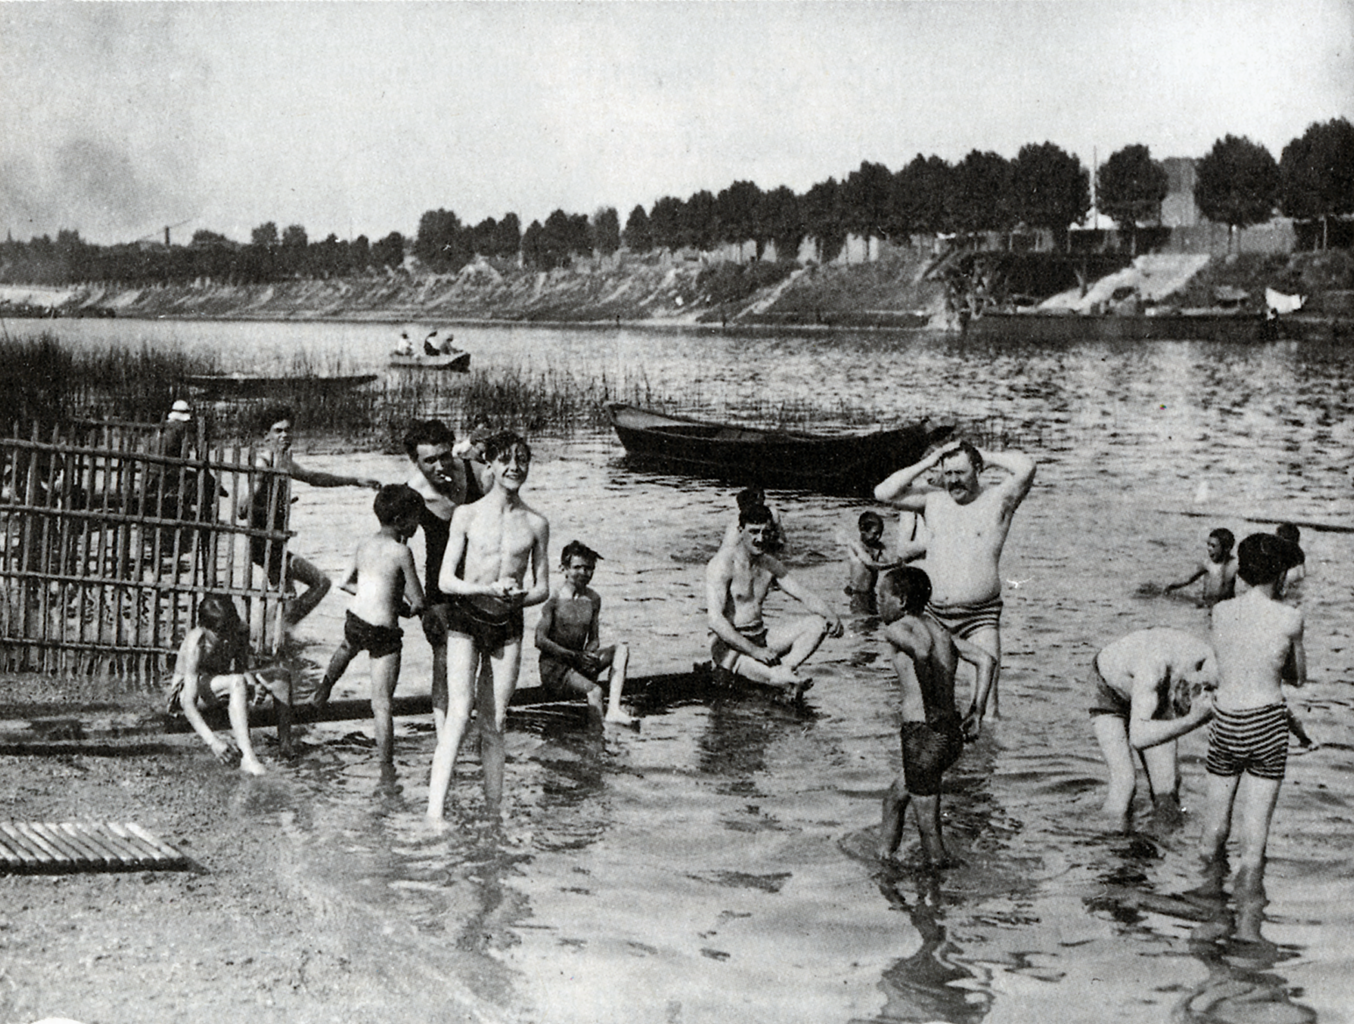 A black and white photograph of a group of men and boys washing themselves in the shallow water near a river. In the background there is a line of trees against a wall.